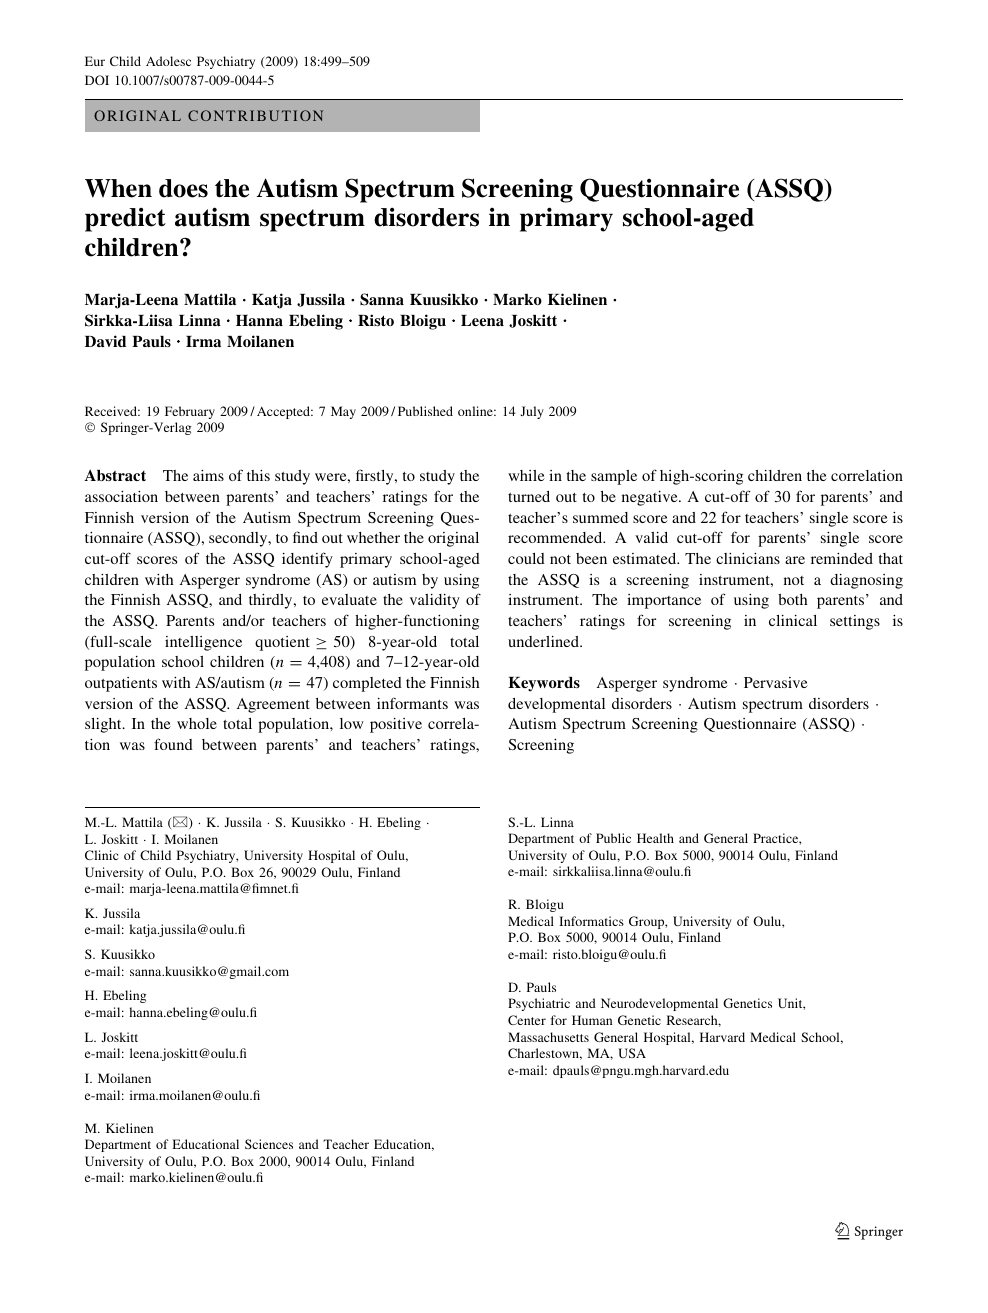 When Does The Autism Spectrum Screening Questionnaire Assq Predict Autism Spectrum Disorders In Primary School-aged Children Topic Of Research Paper In Clinical Medicine Download Scholarly Article Pdf And Read For Free